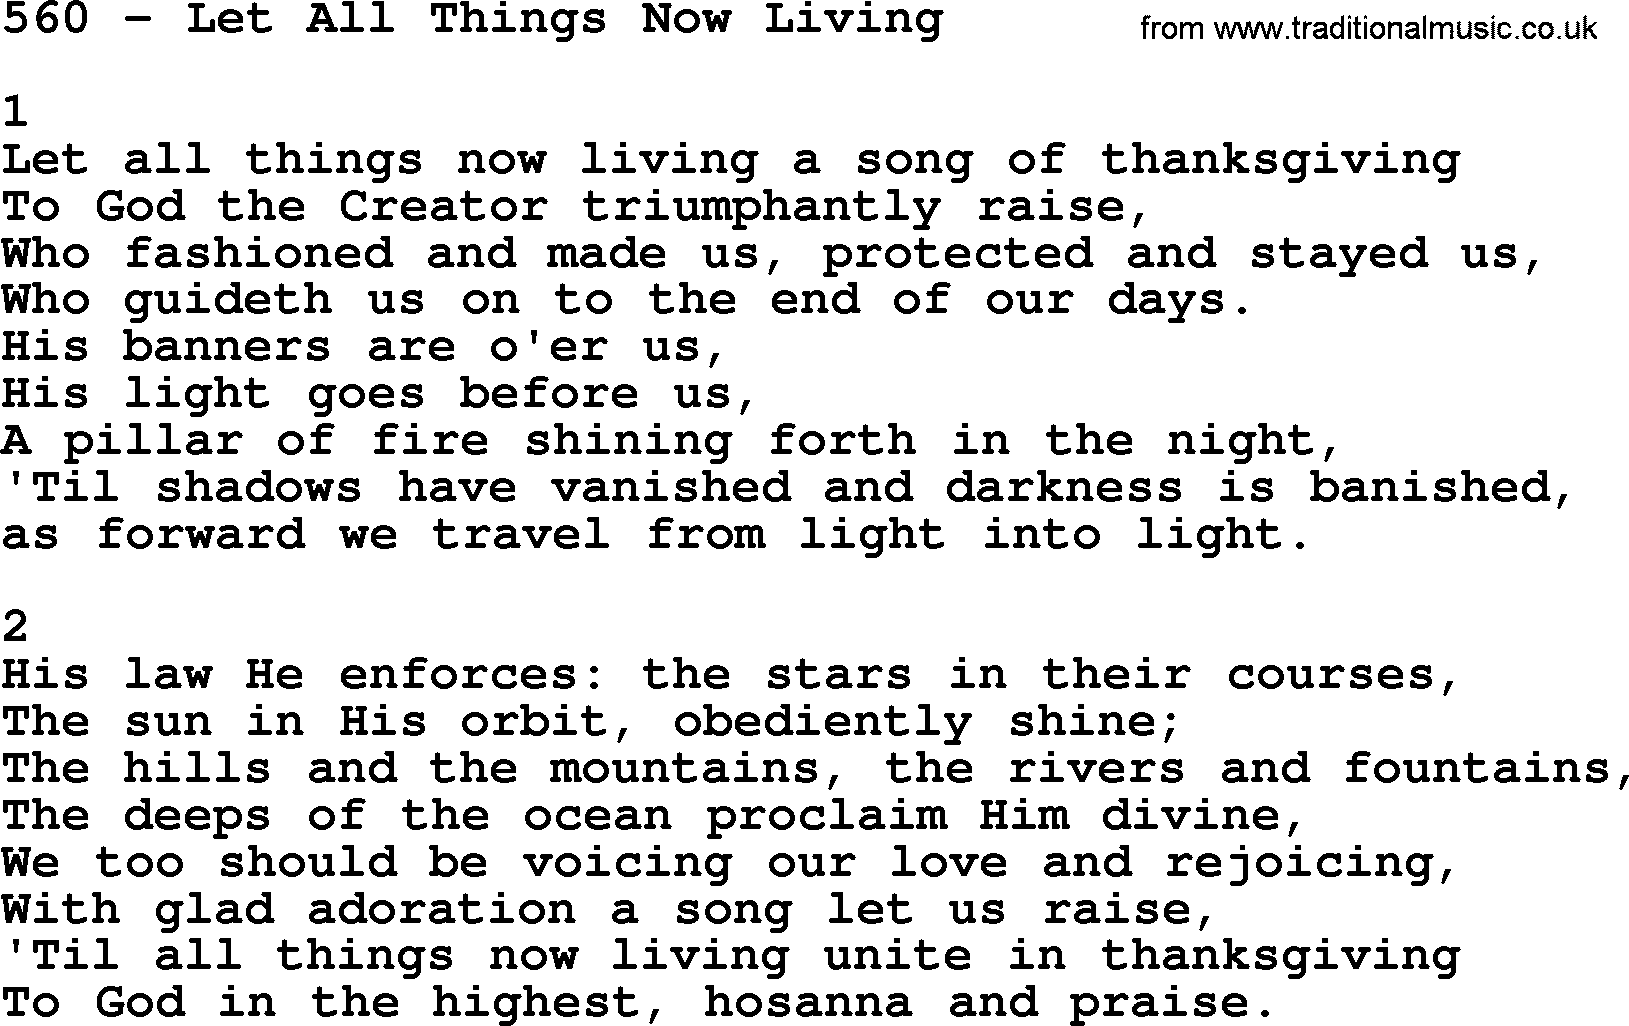 Complete Adventis Hymnal, title: 560-Let All Things Now Living, with lyrics, midi, mp3, powerpoints(PPT) and PDF,